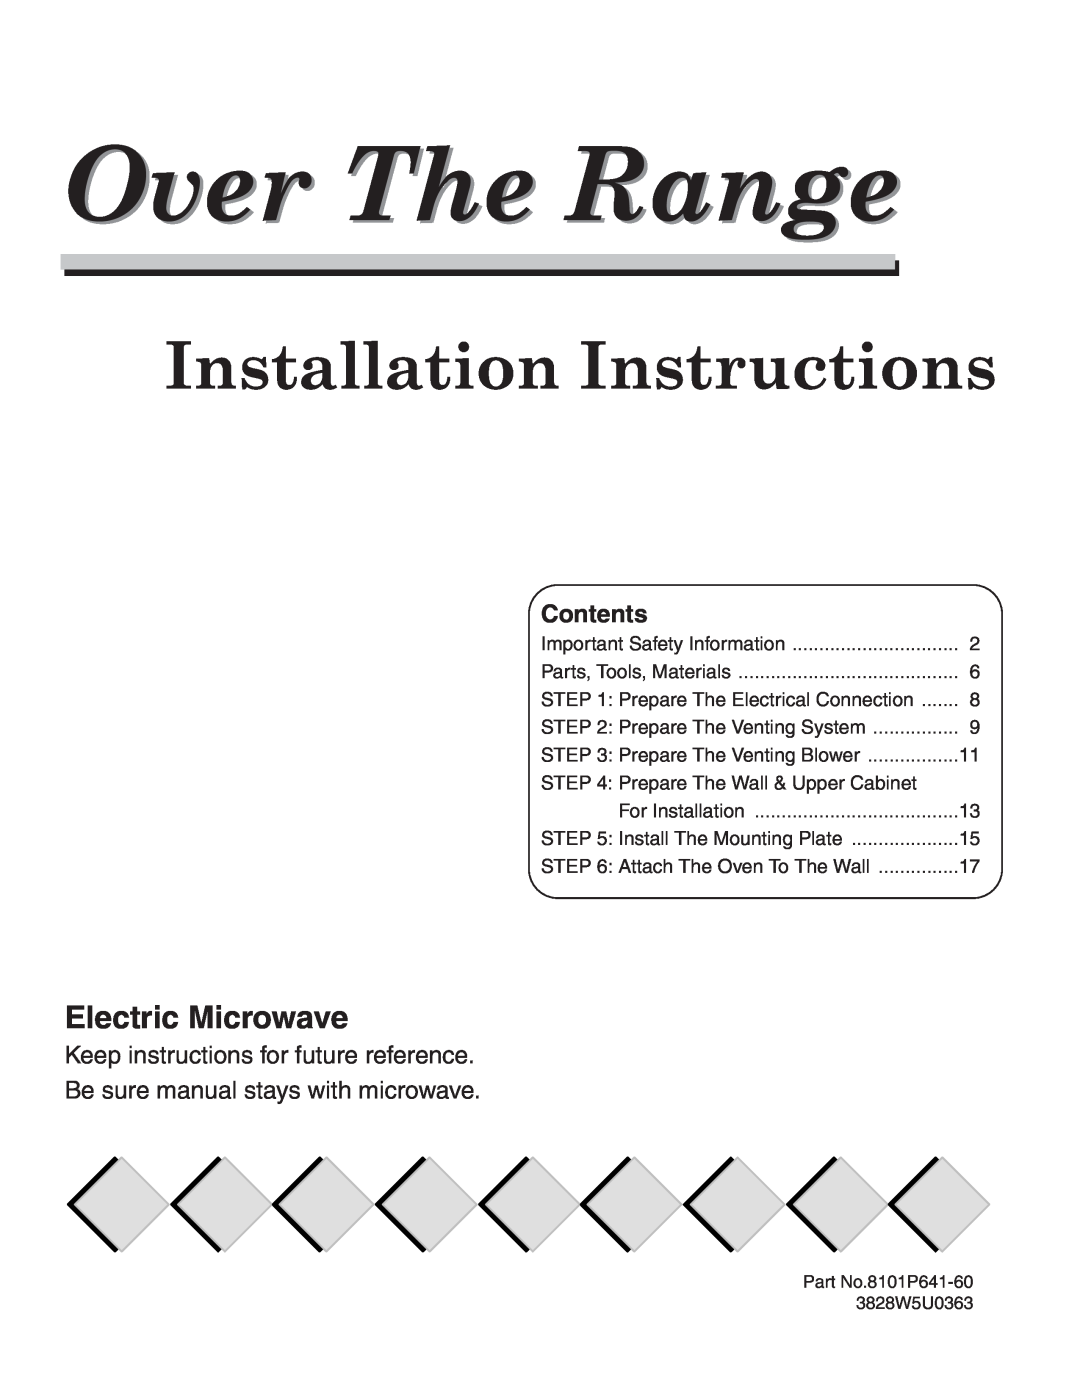 Maytag 8101P641-60 installation instructions Over The Range, Installation Instructions, Electric Microwave, Contents 